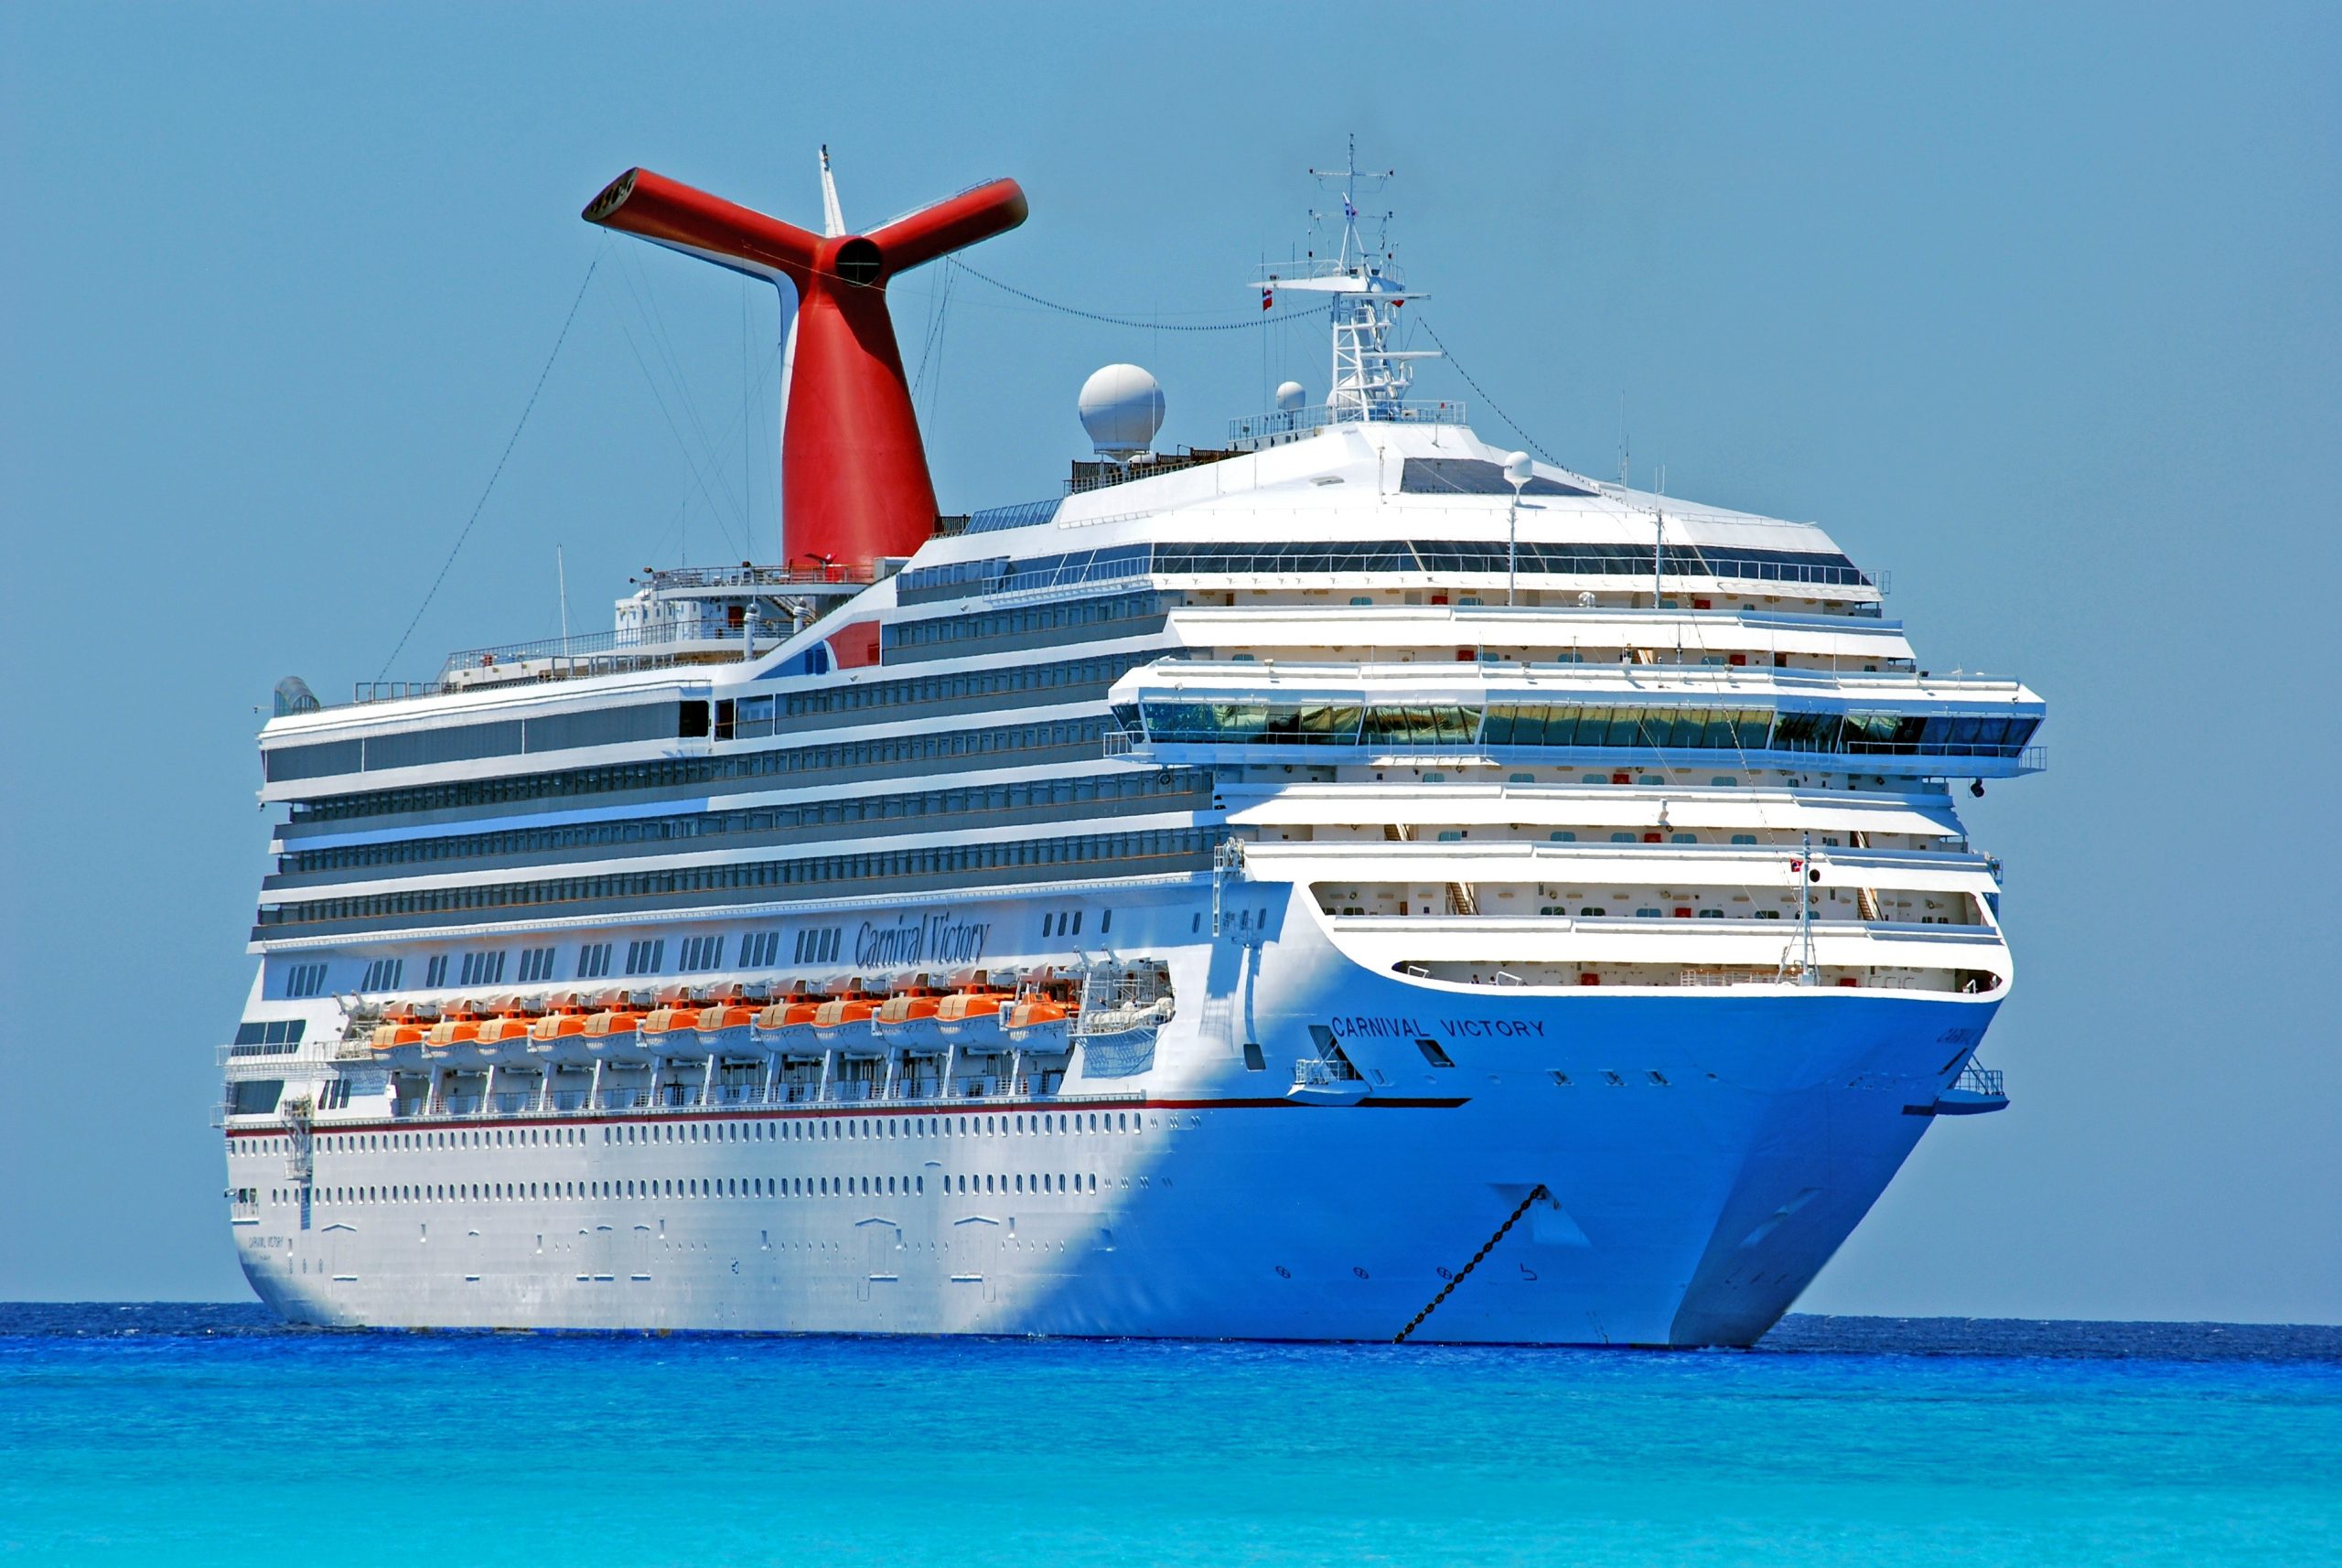 Where Does Carnival Cruise to?